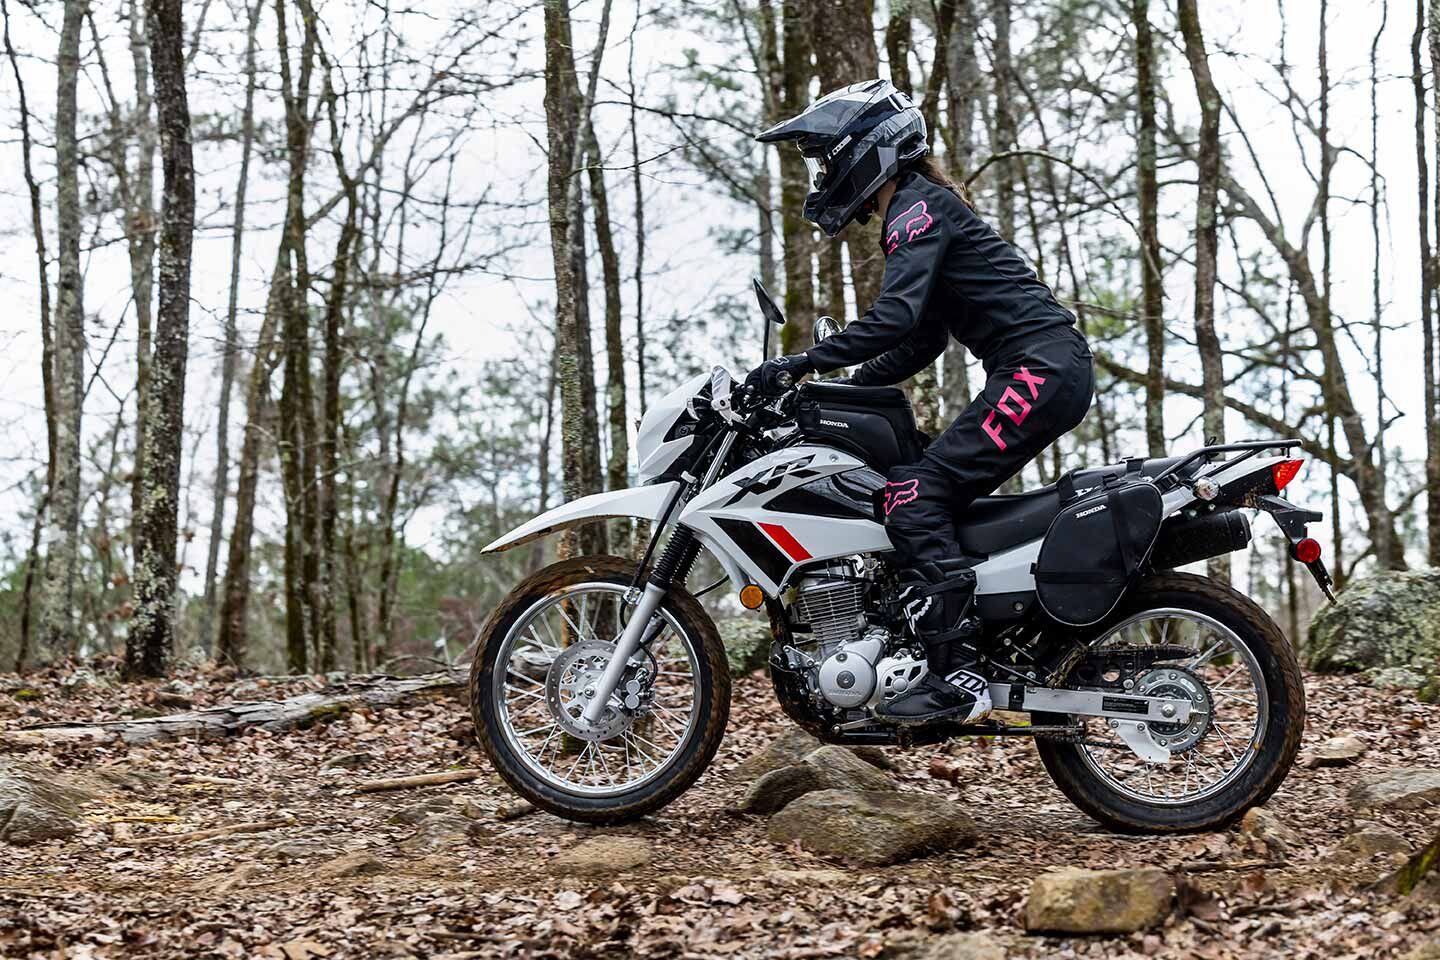 The XR150L is one of the most approachable dual sports on the market, making it a great option for riders looking to explore the outskirts of town.